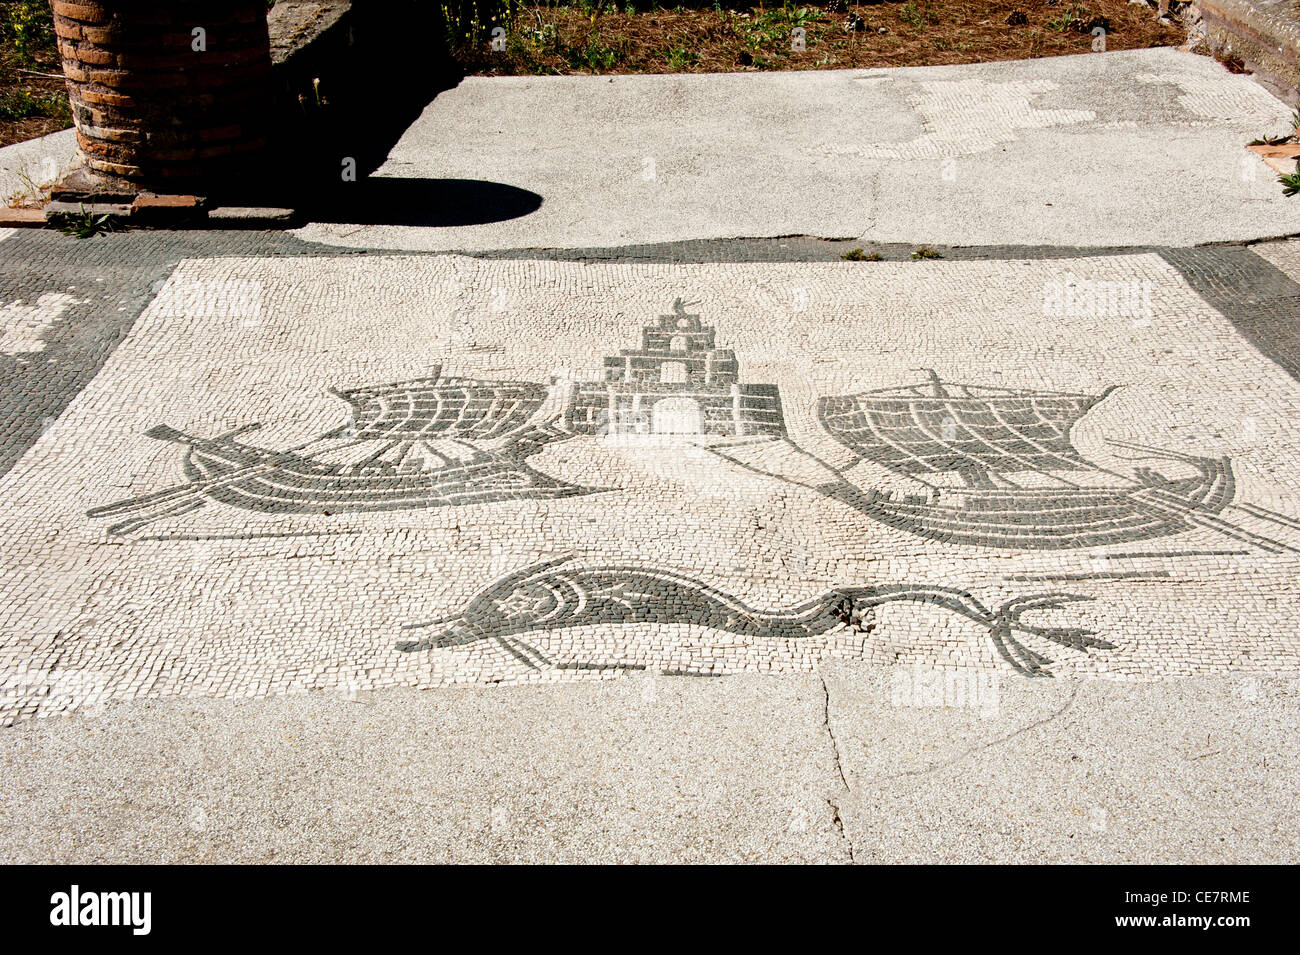 Mosaic designs in Ostia Antic were designed to designate the goods sold in the local shop. Stock Photo